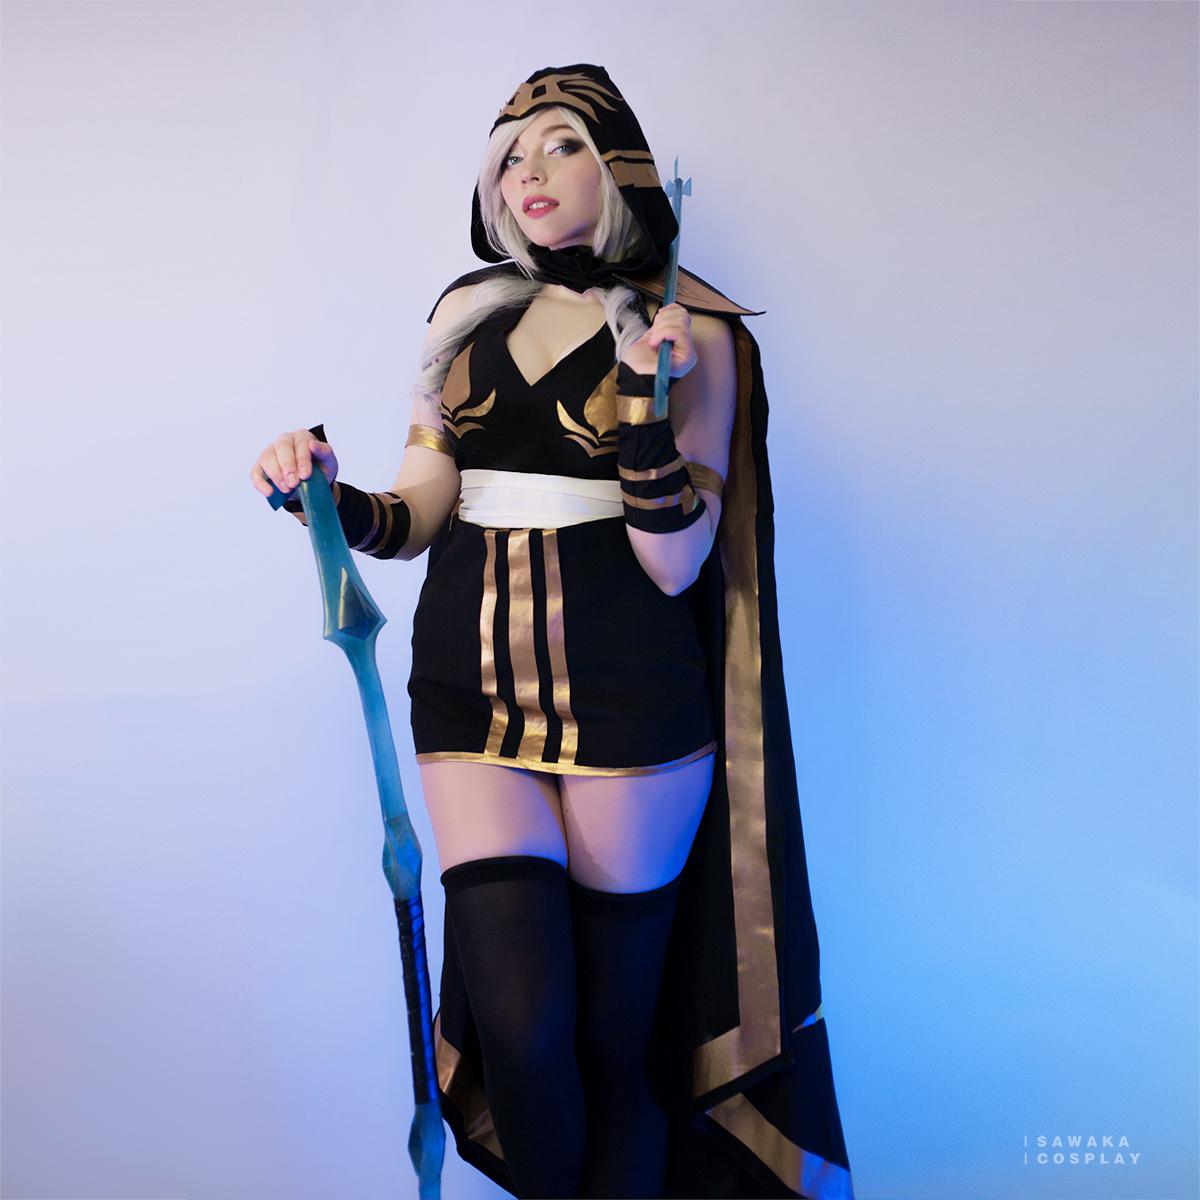 Self Ashe From League Of Legends Cosplay By Sawak